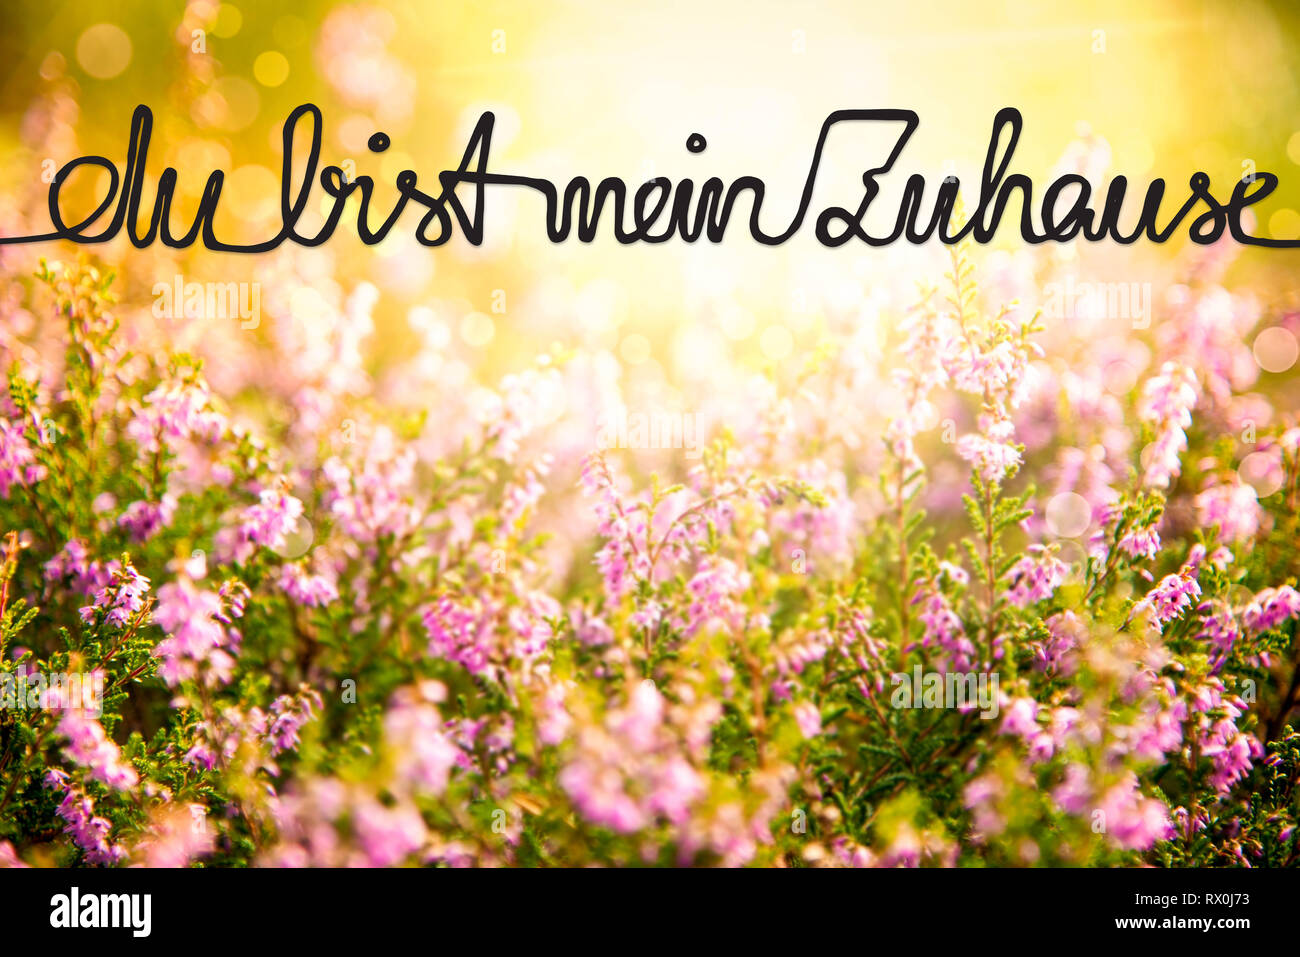 Erica Flower Field, Calligraphy Zuhause Means Home Stock Photo